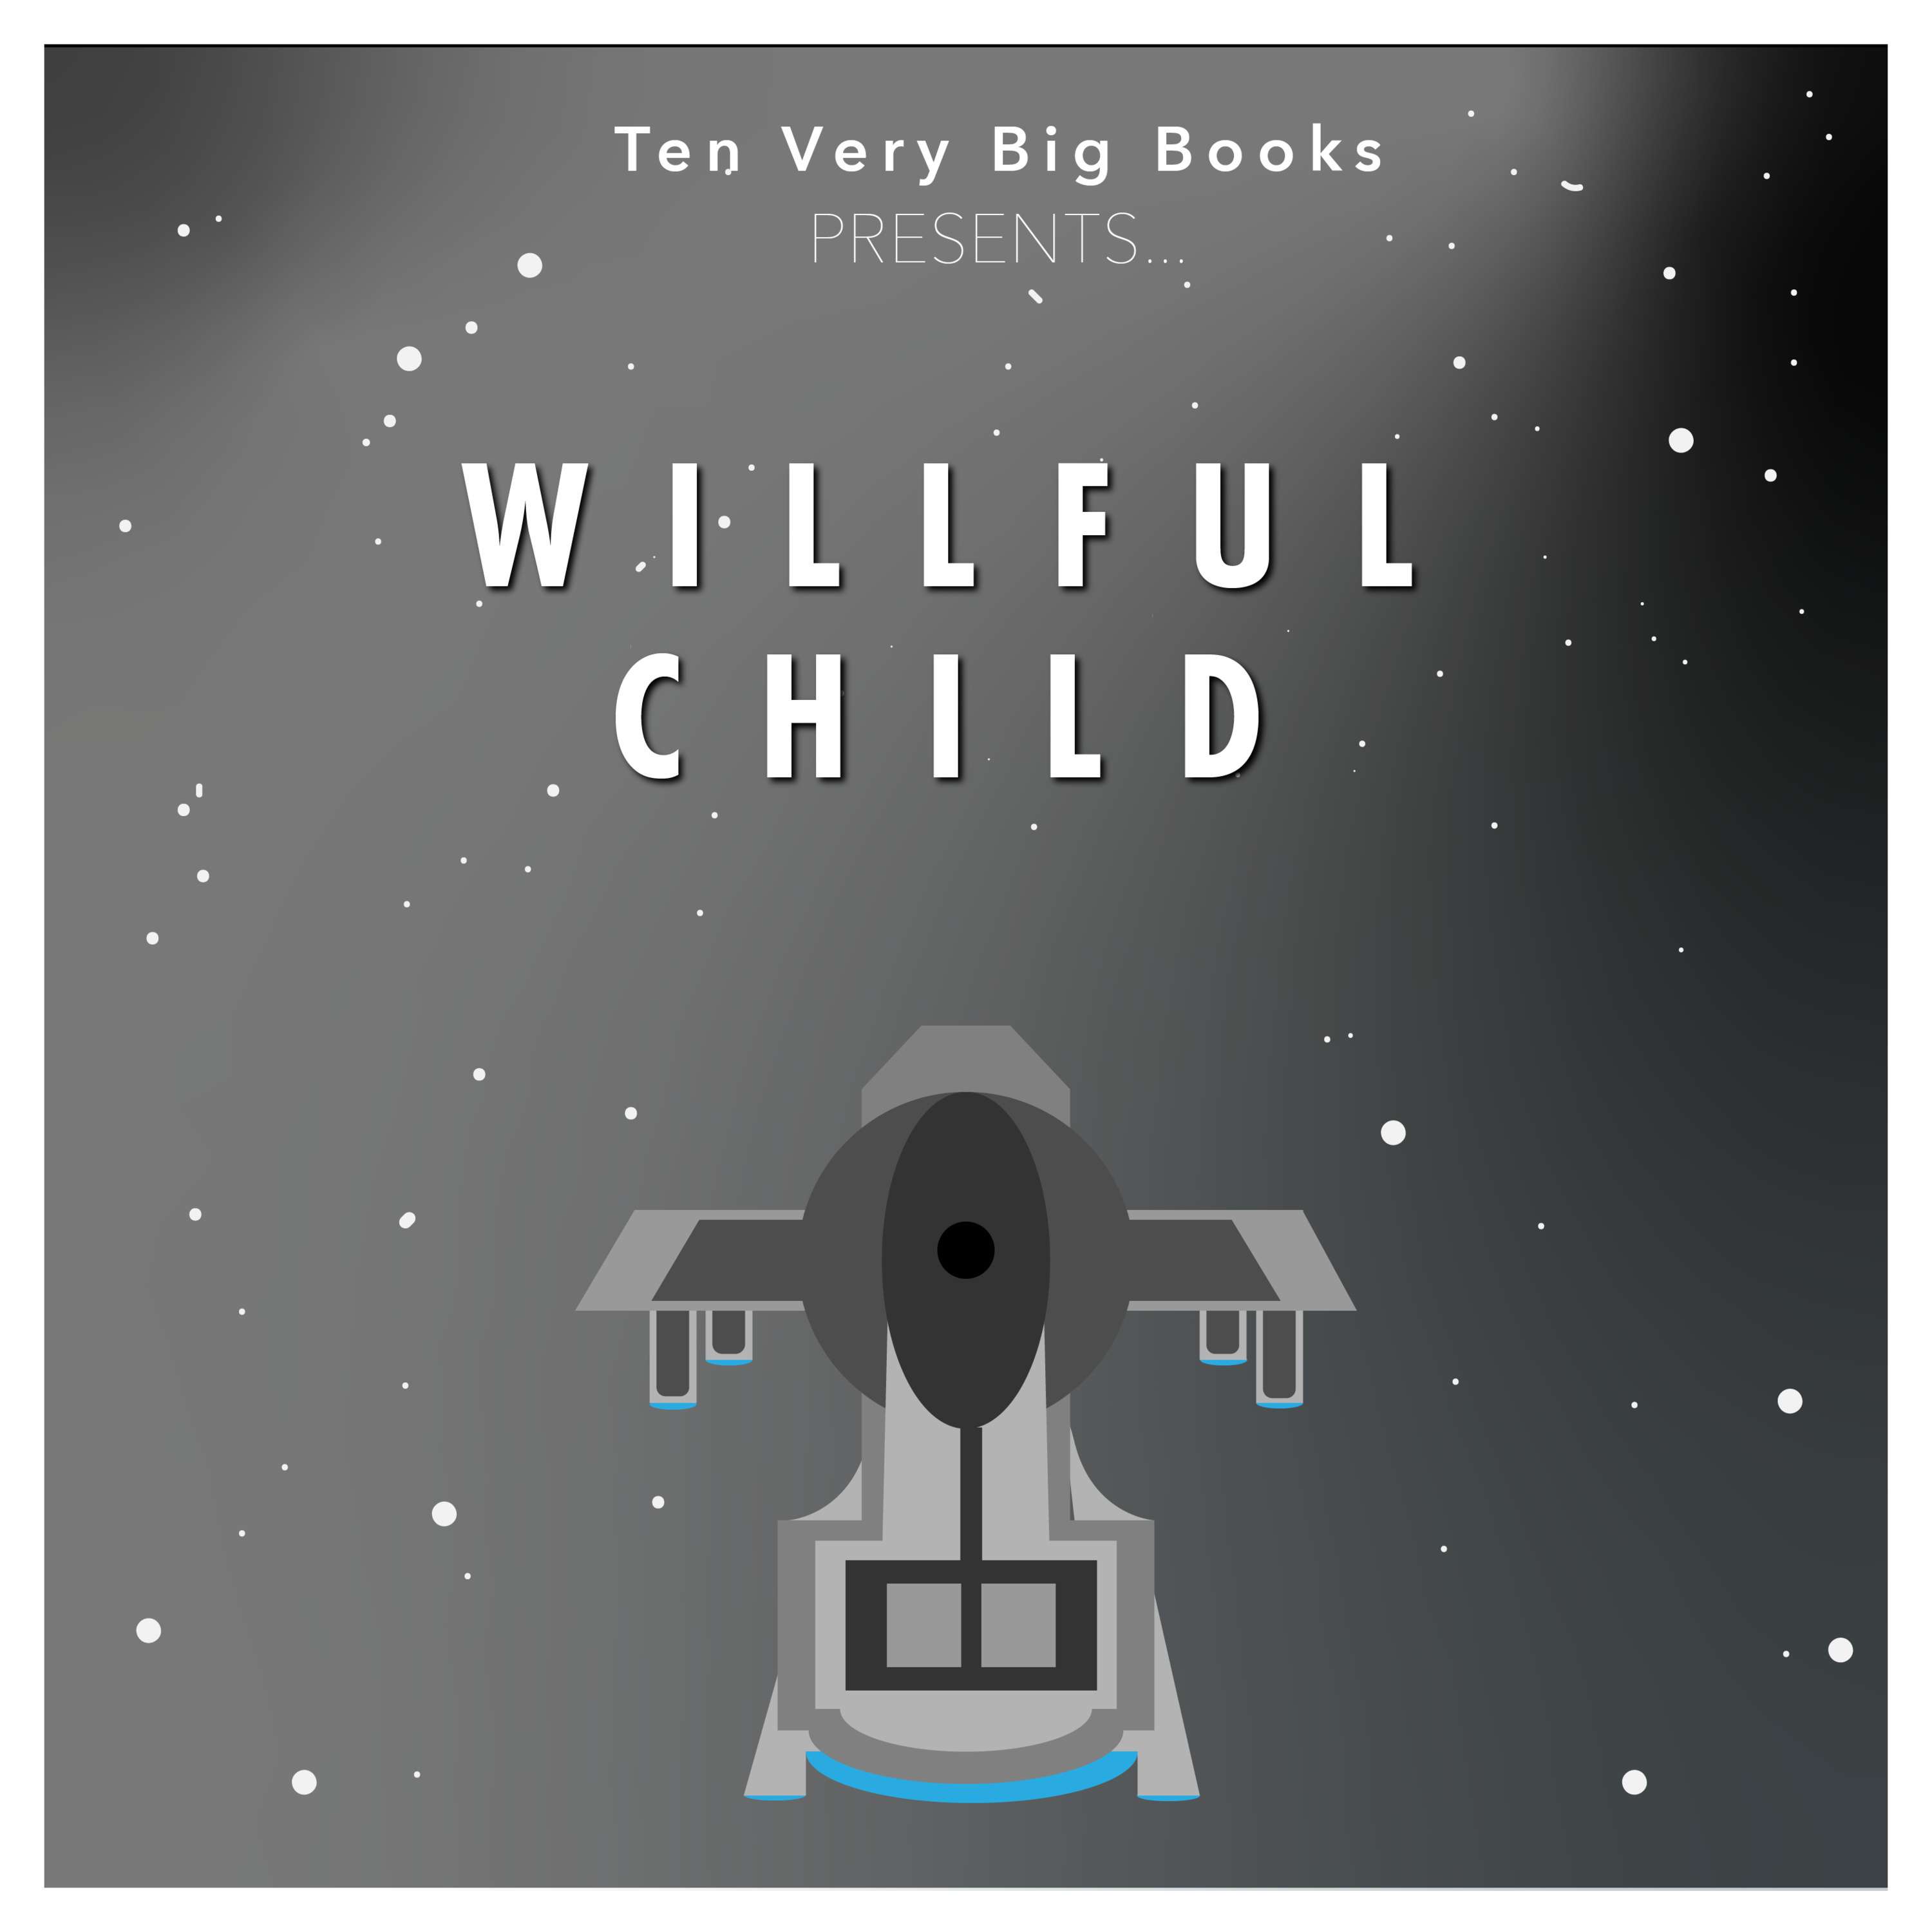 Willful Child: Wrath of Betty